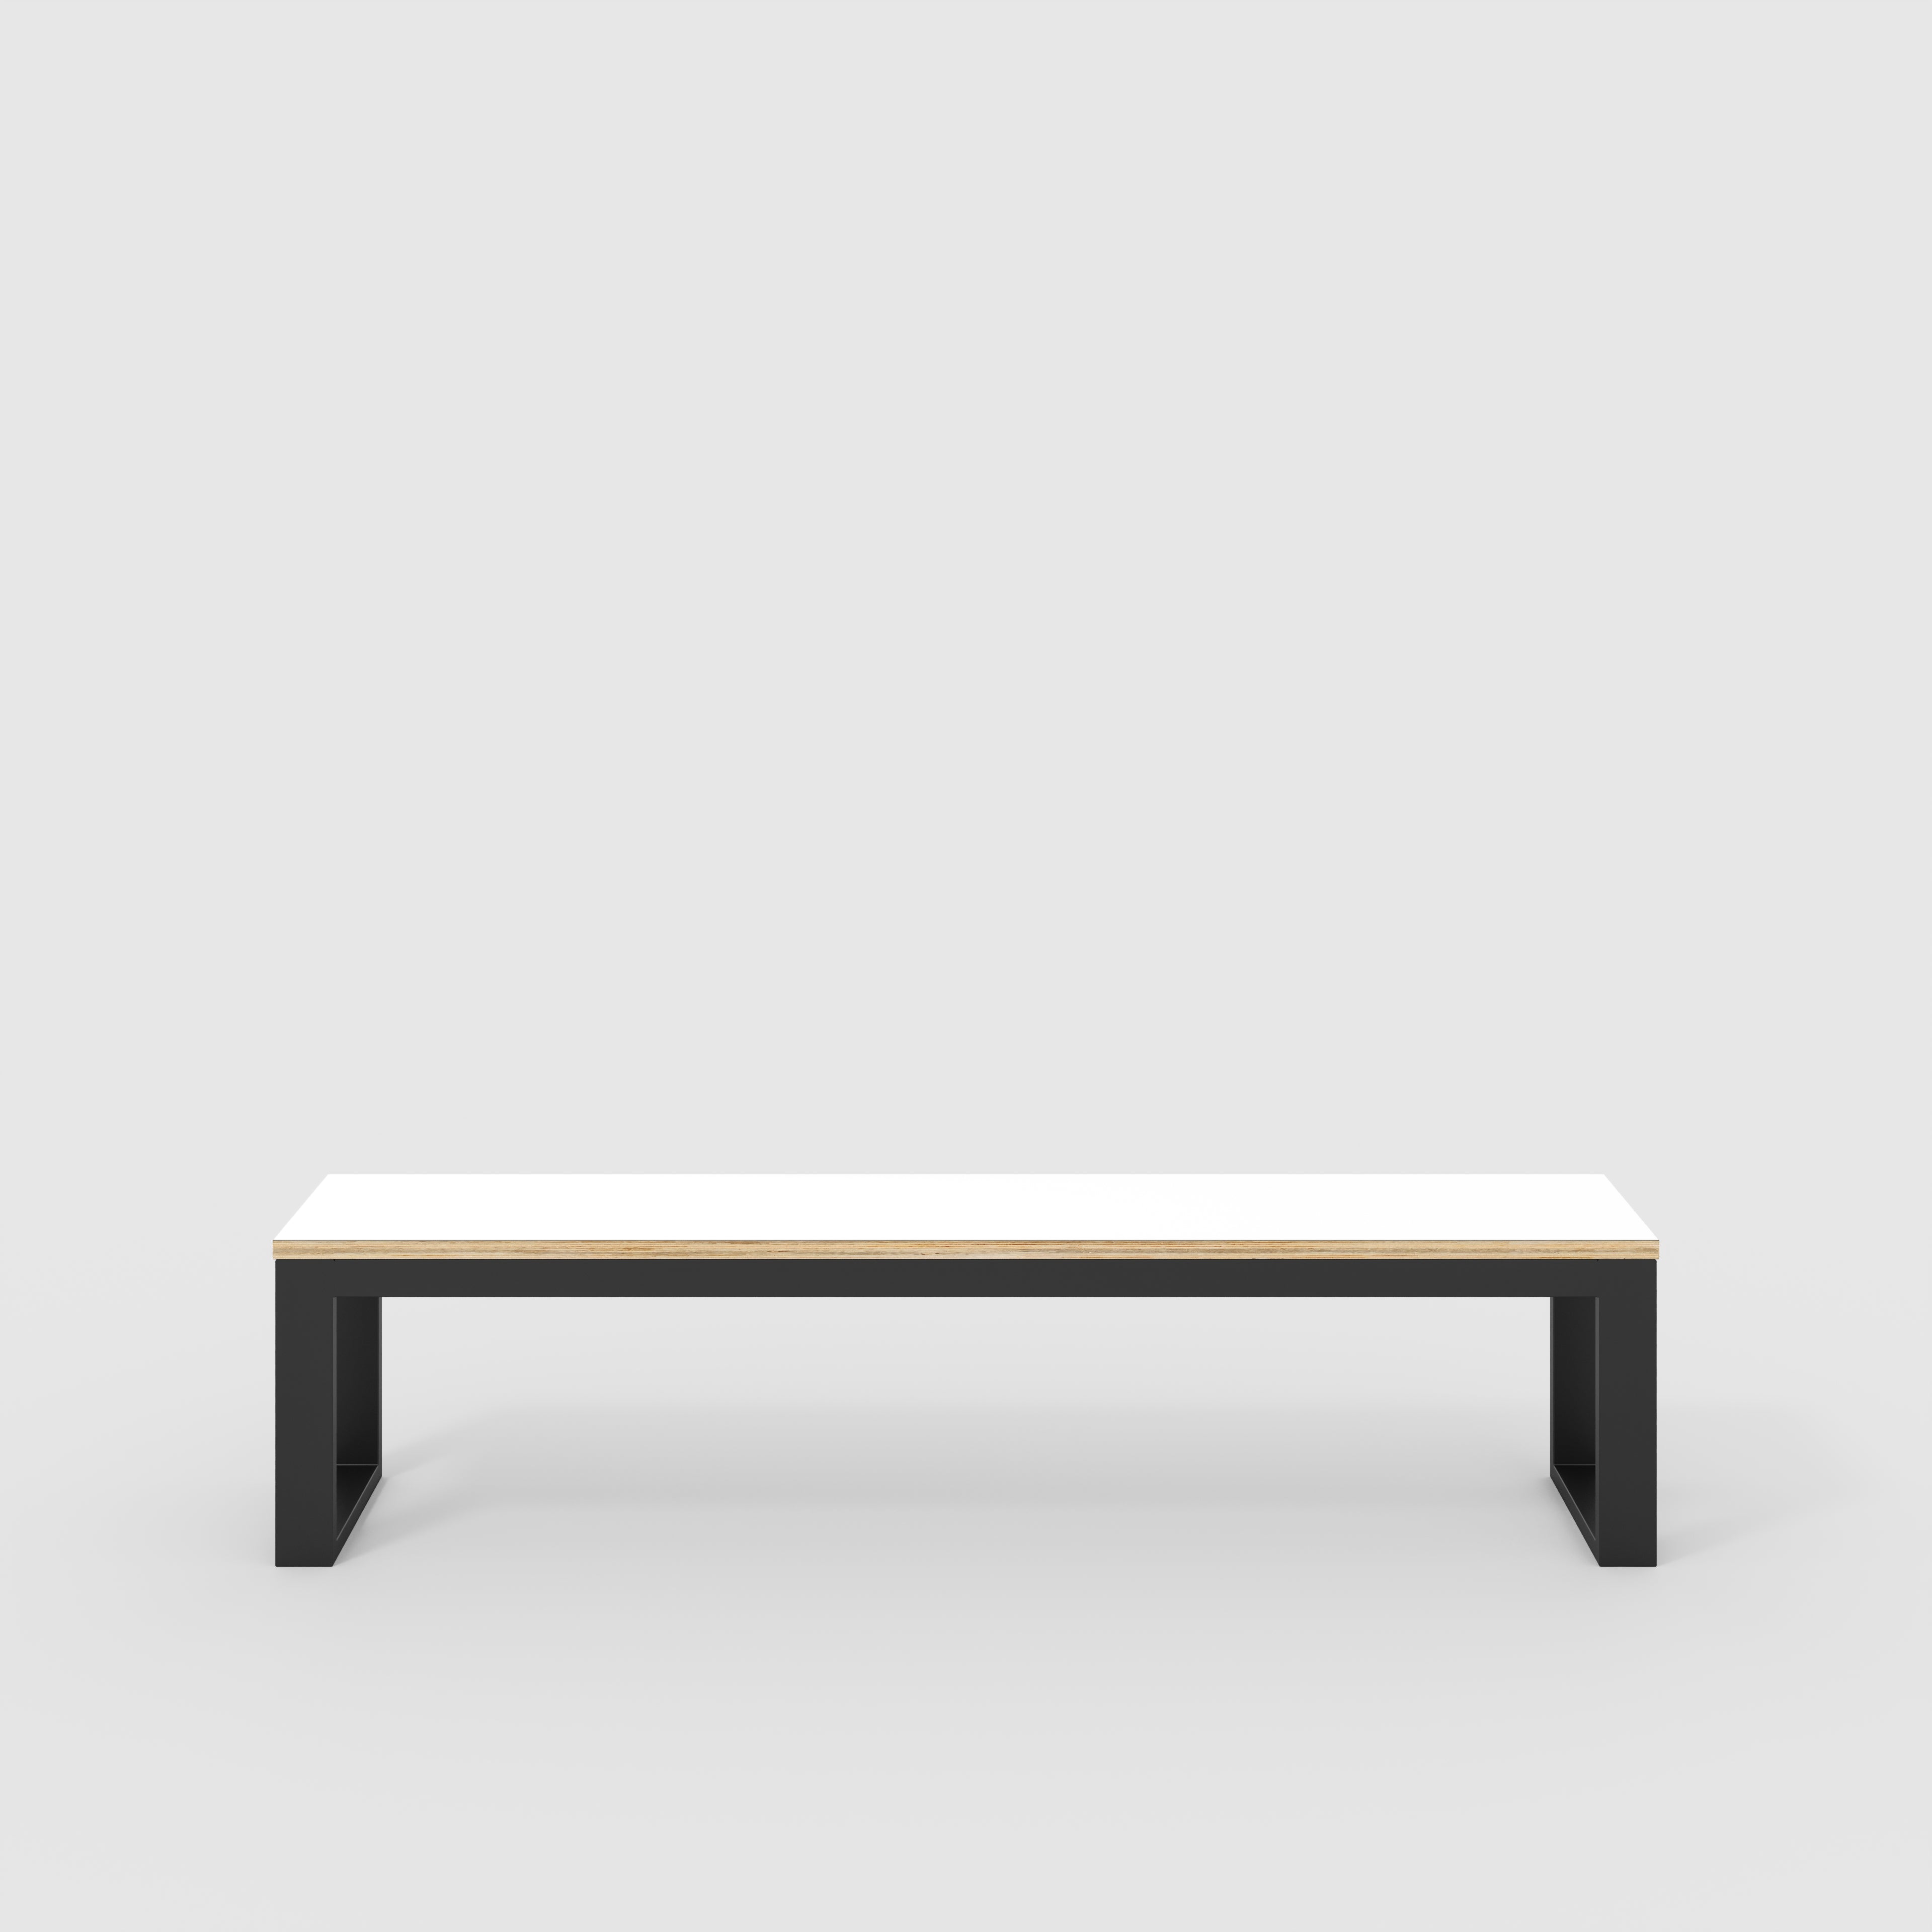 Bench Seat with Black Industrial Frame - Formica White - 1800(w) x 325(d)